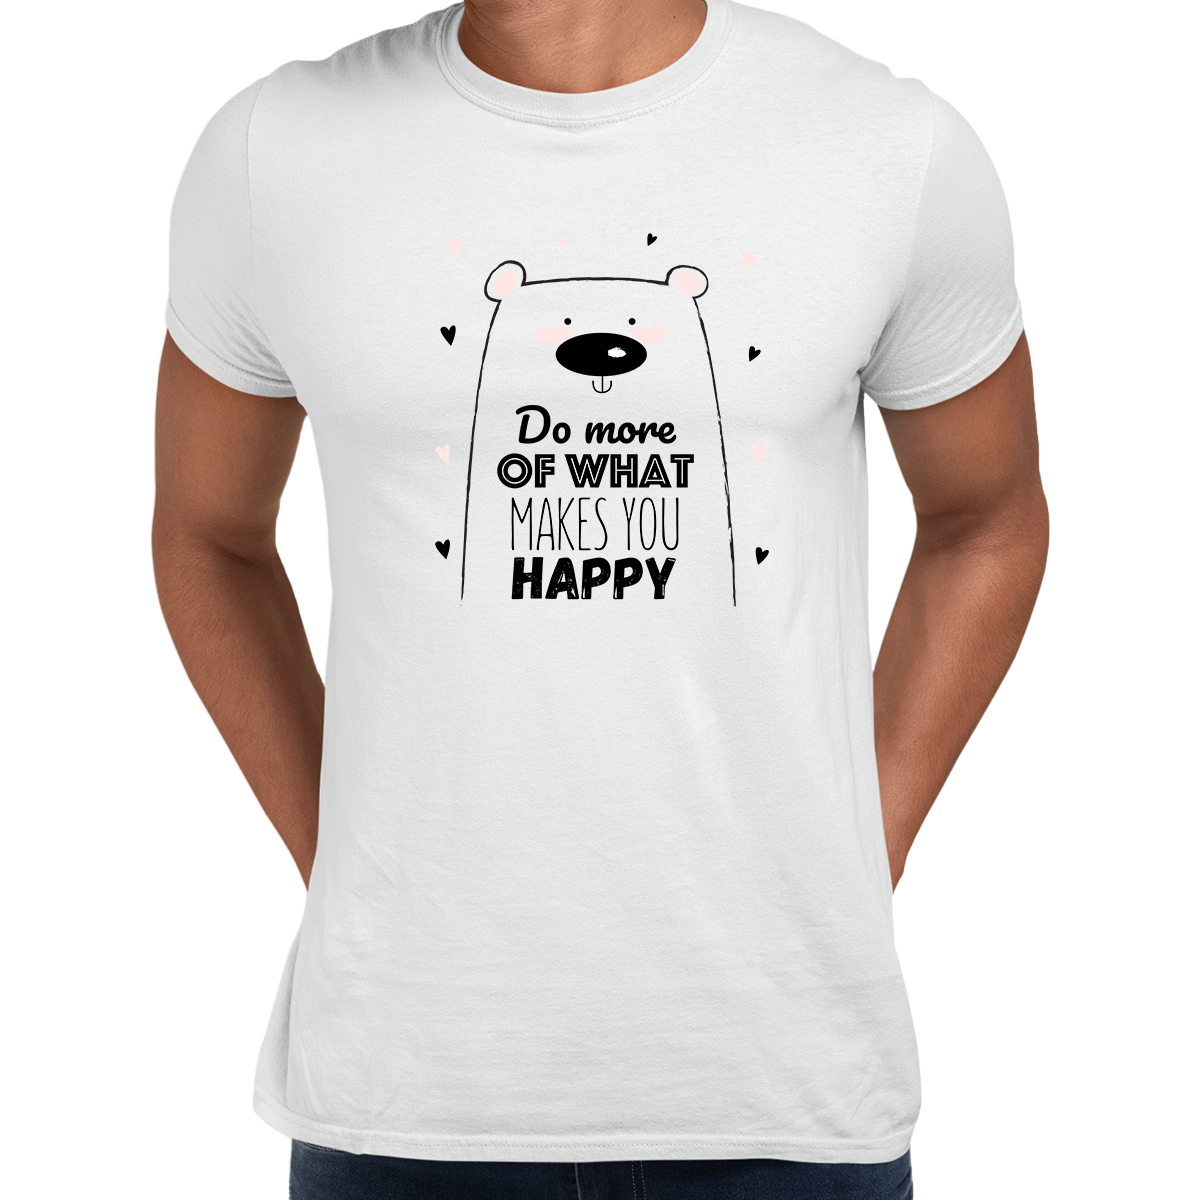 Unisex Funny Animal Quote Shirt Do More of What Makes you Happy Dog T-shirt - Kuzi Tees